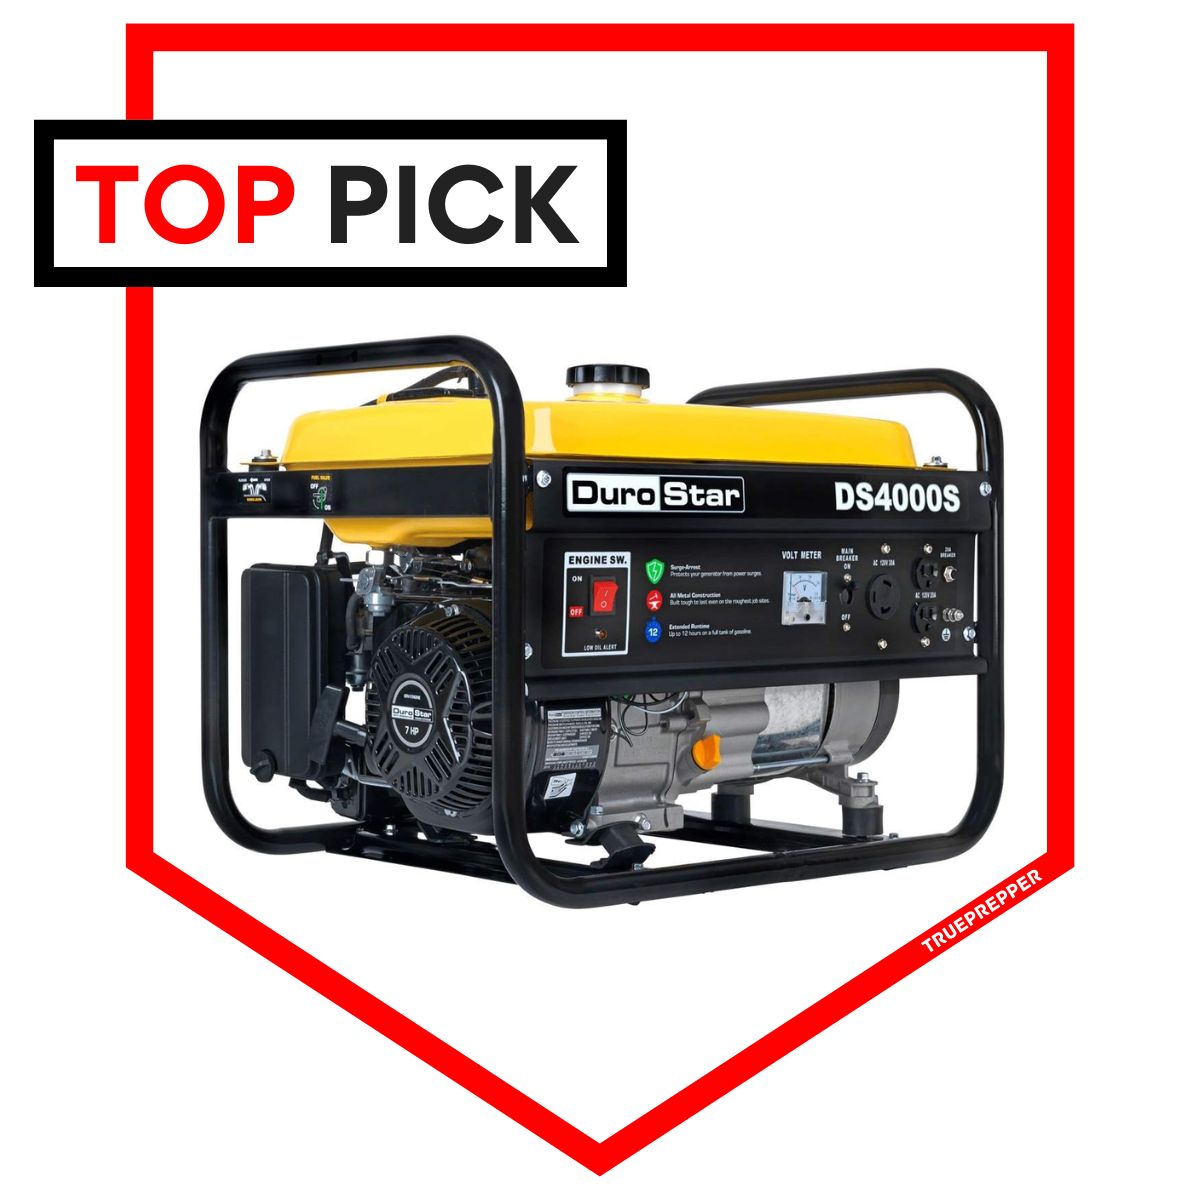 DuroStar DS4000S Portable Generator for Emergencies and Disasters